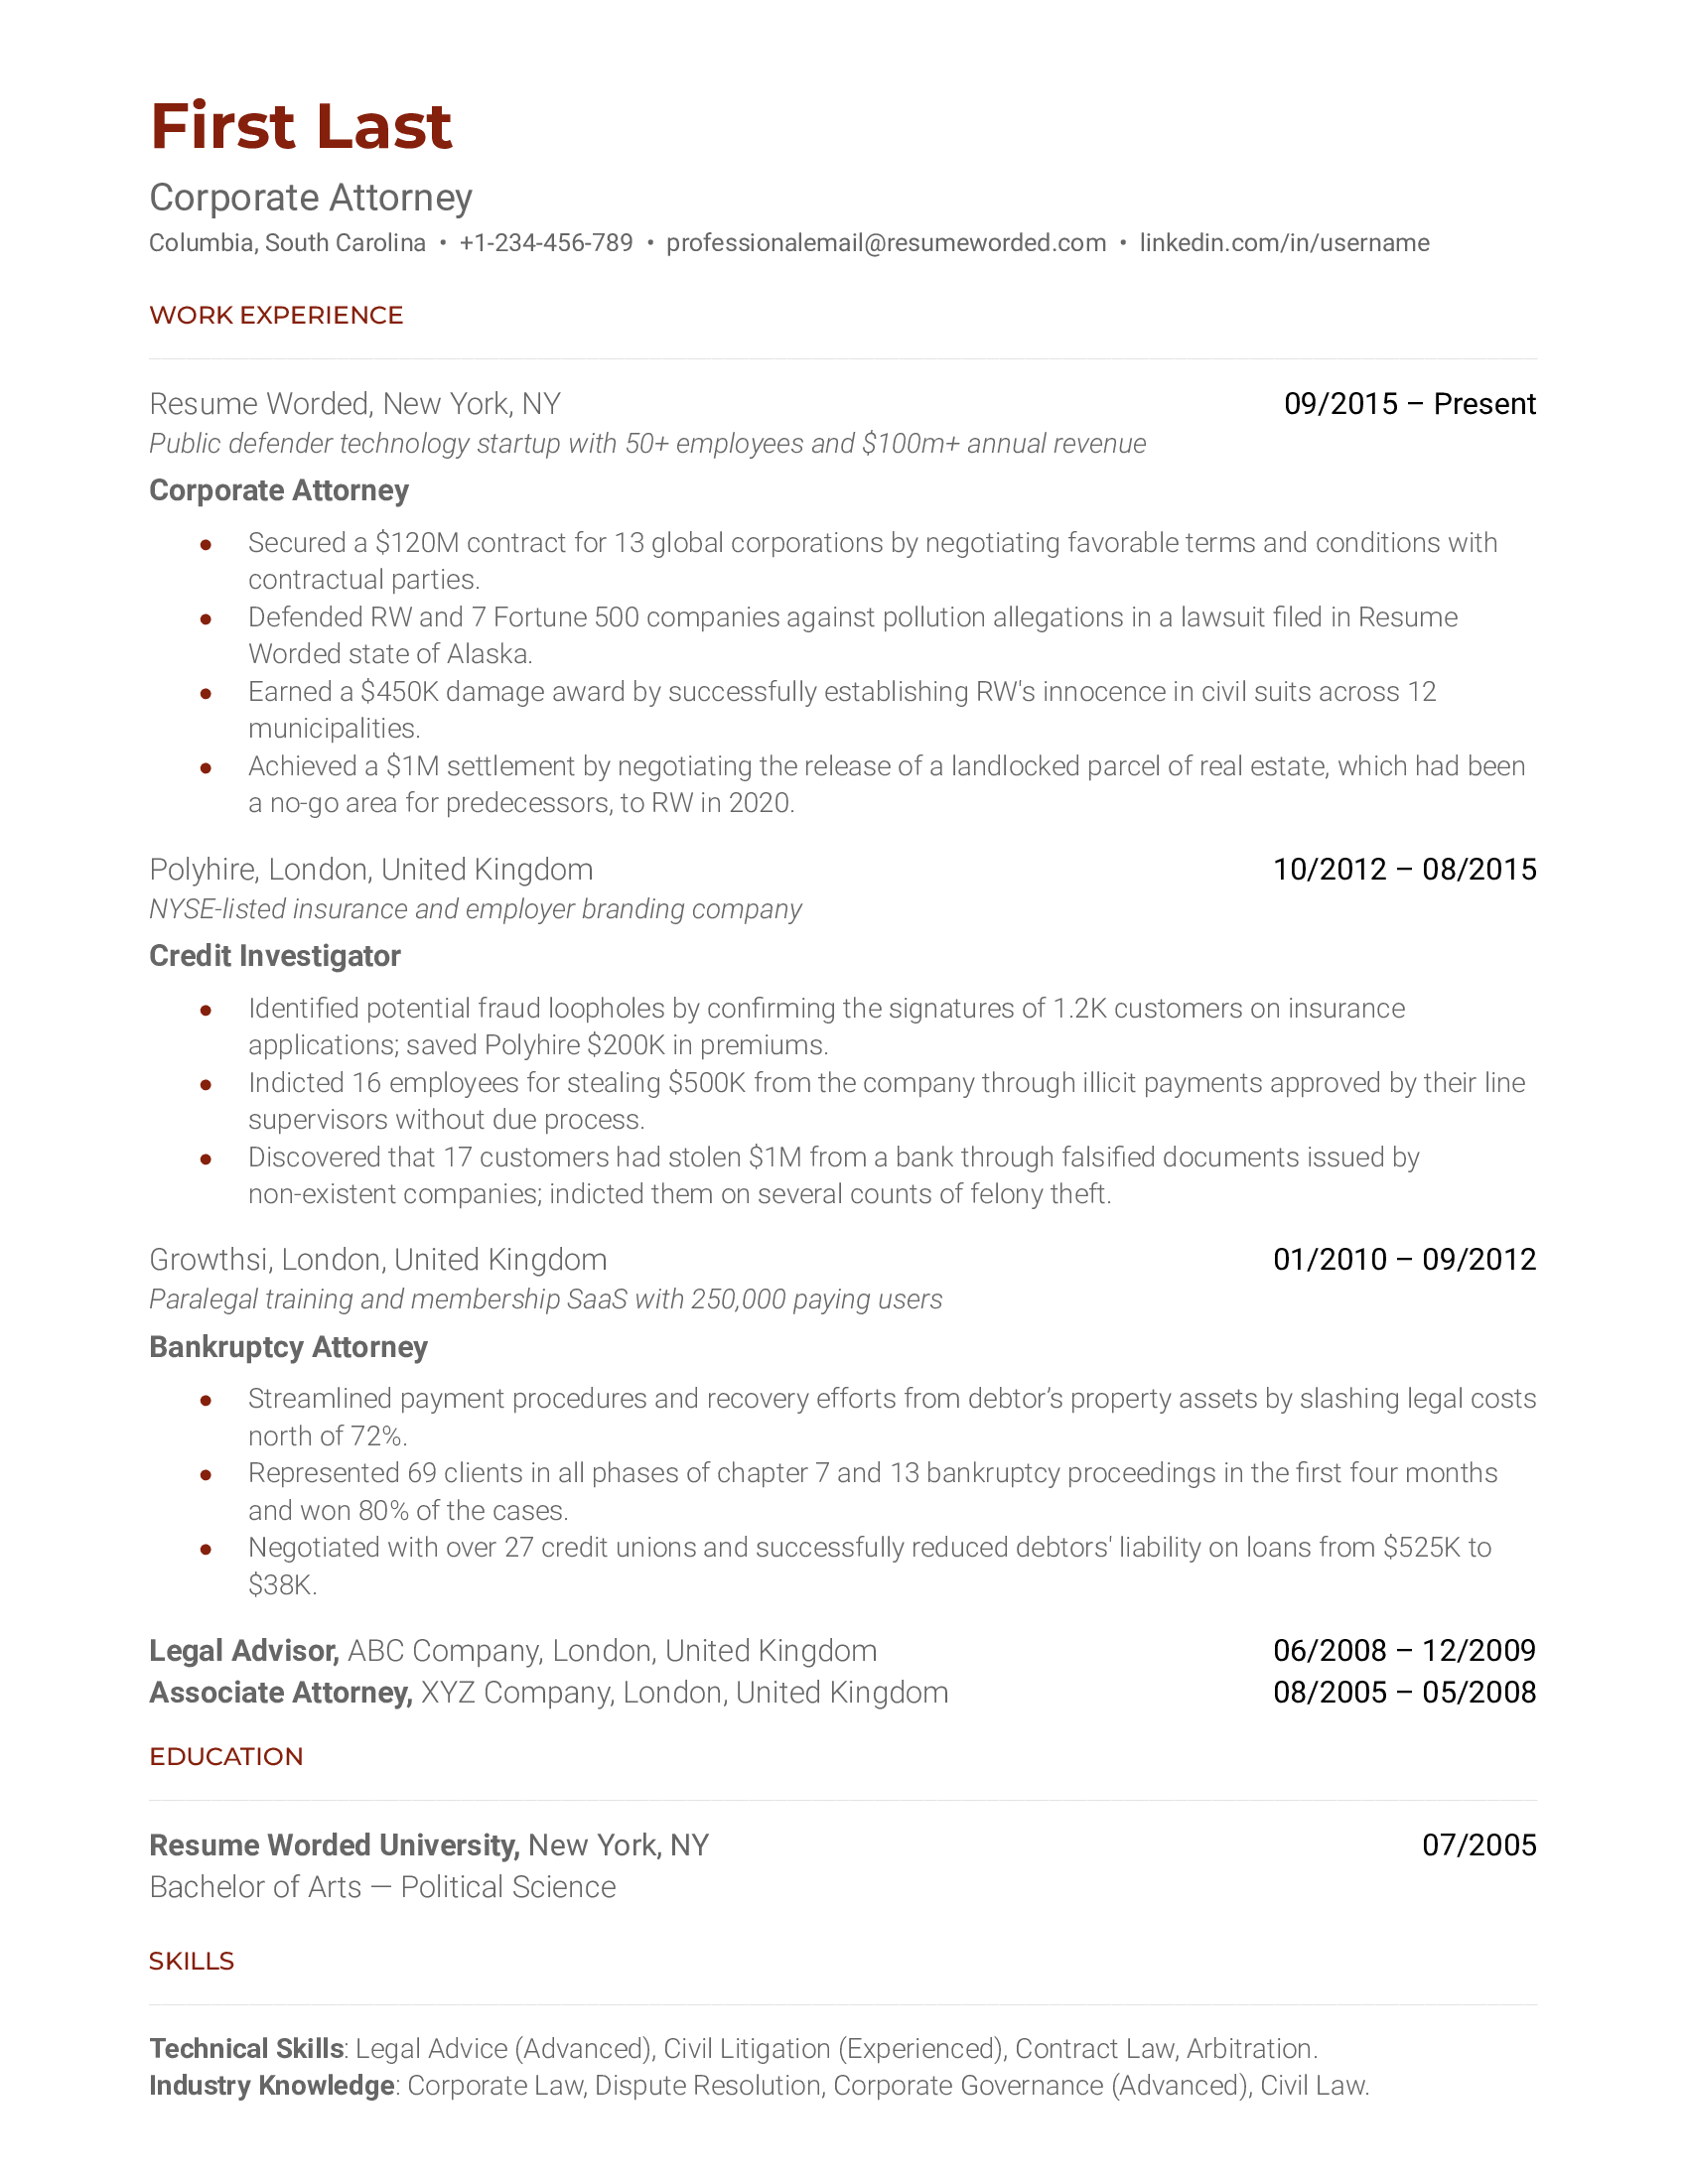 A well-structured corporate attorney CV showcasing legal certifications and negotiation skills.